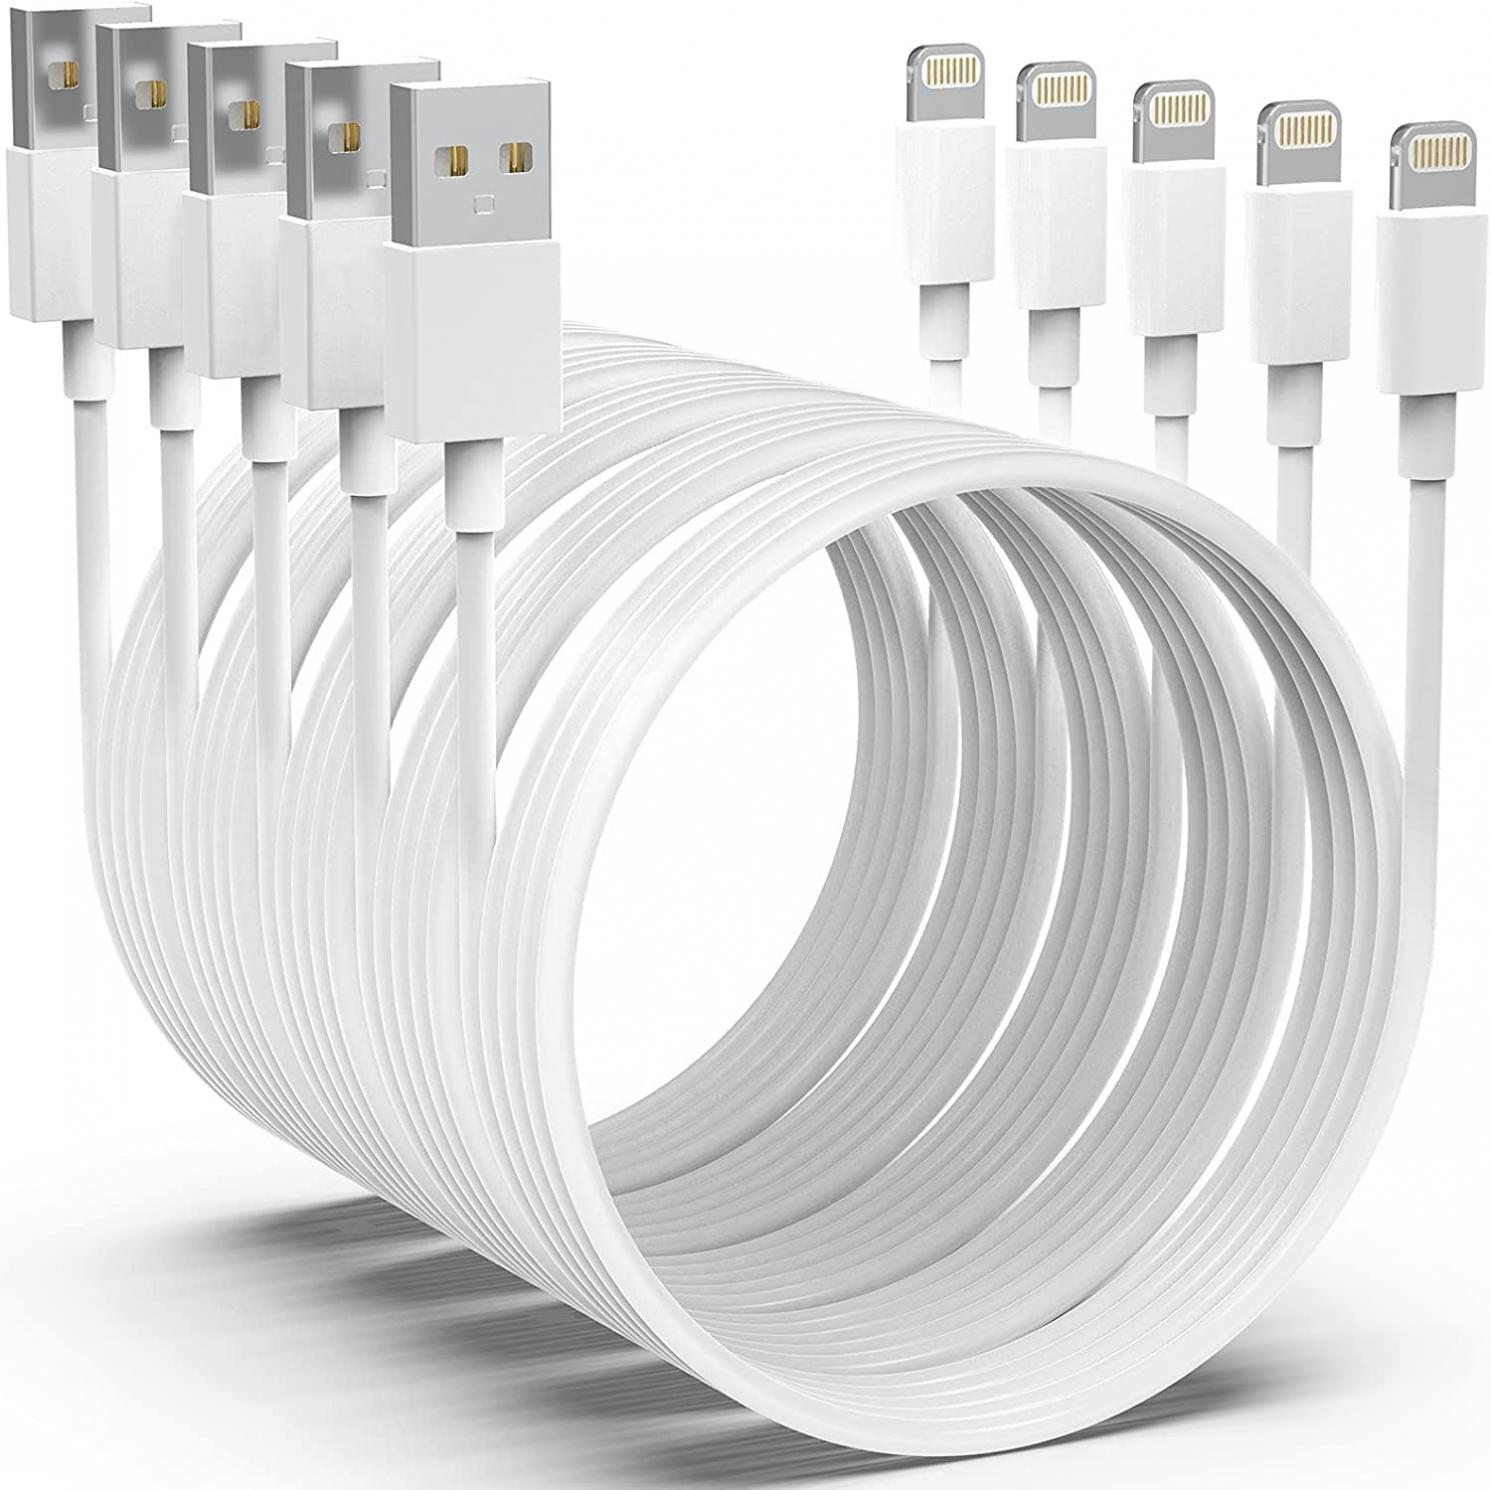 [Apple MFi Certified] iPhone Charger 5pack[6/6/6/10/10FT] Long Lightning Cable Fast Charging Cord iPhone Charging Cable Compatible iPhone 14/14 Pro/Max/13/12/11 Pro Max/XS MAX/XR/XS/X/8/7/Plus iPad